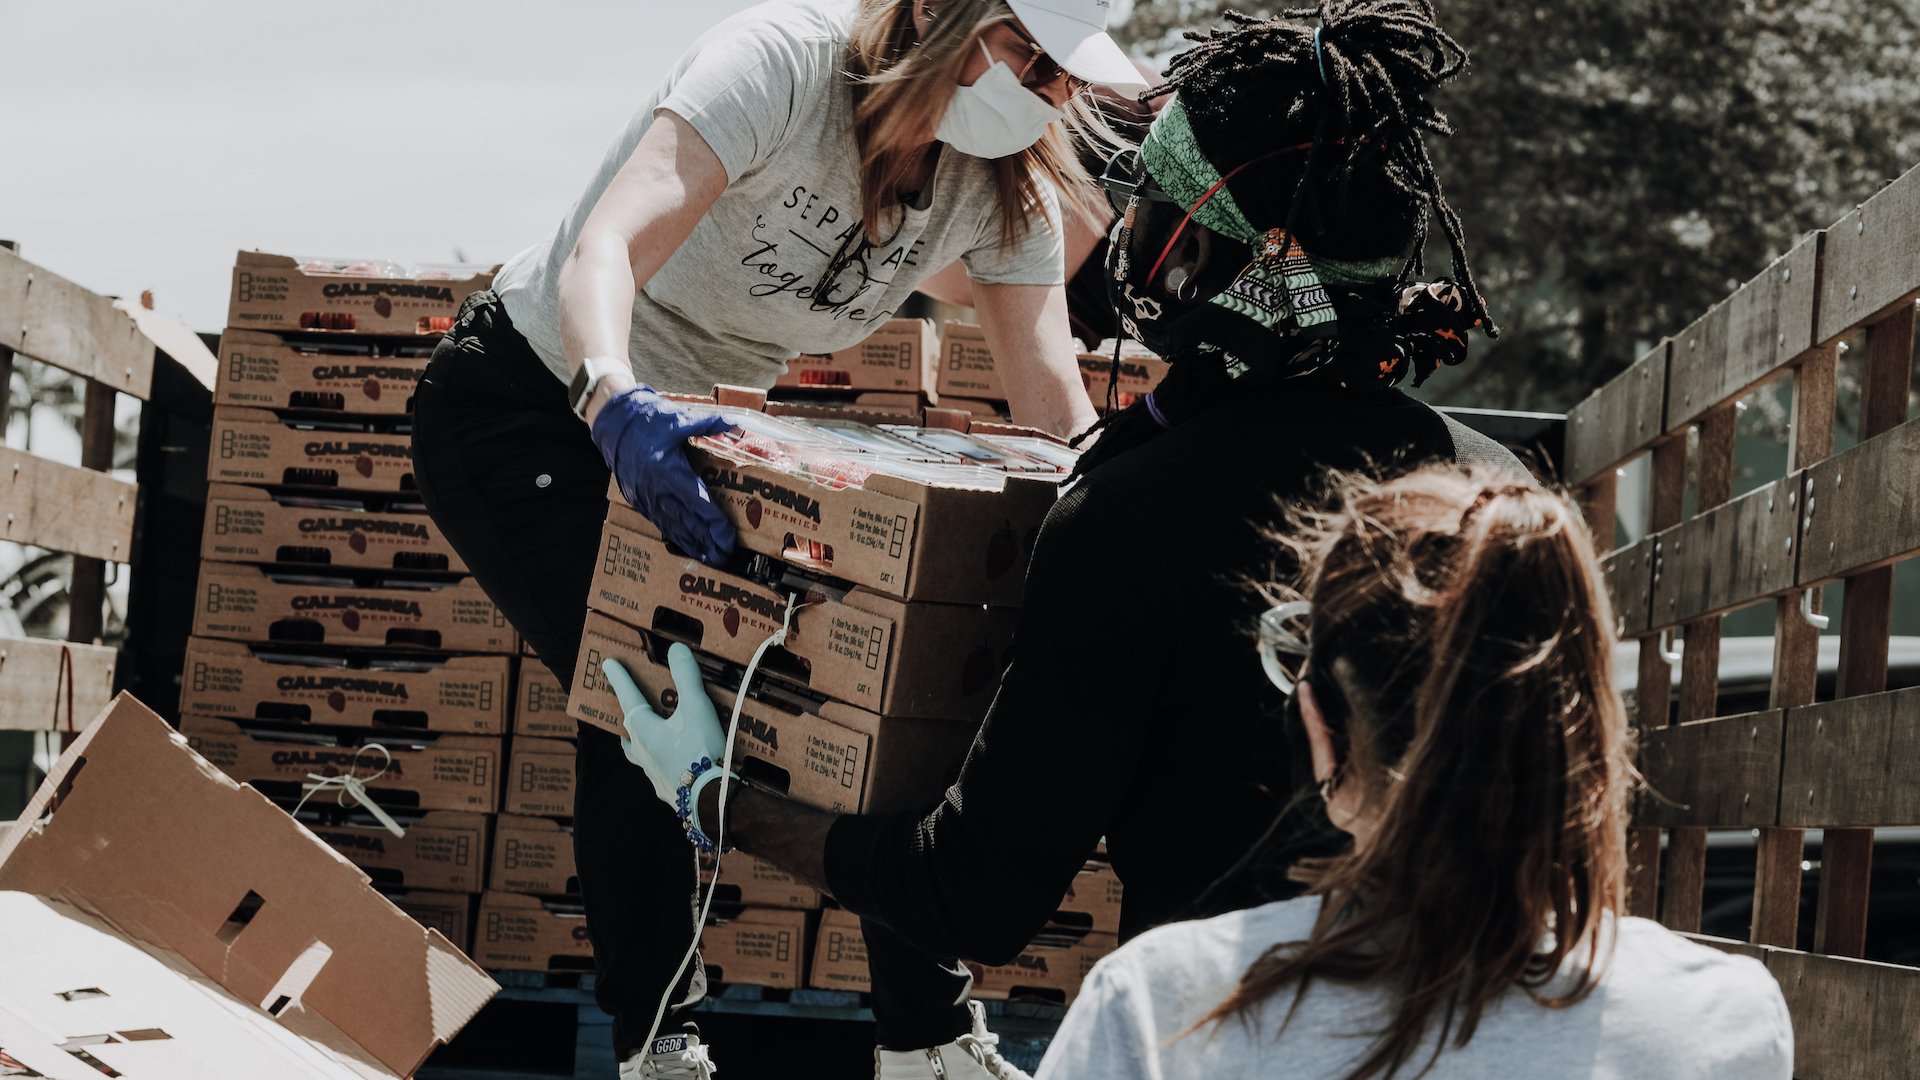 women in masks volunteering and unloading boxes from truck 